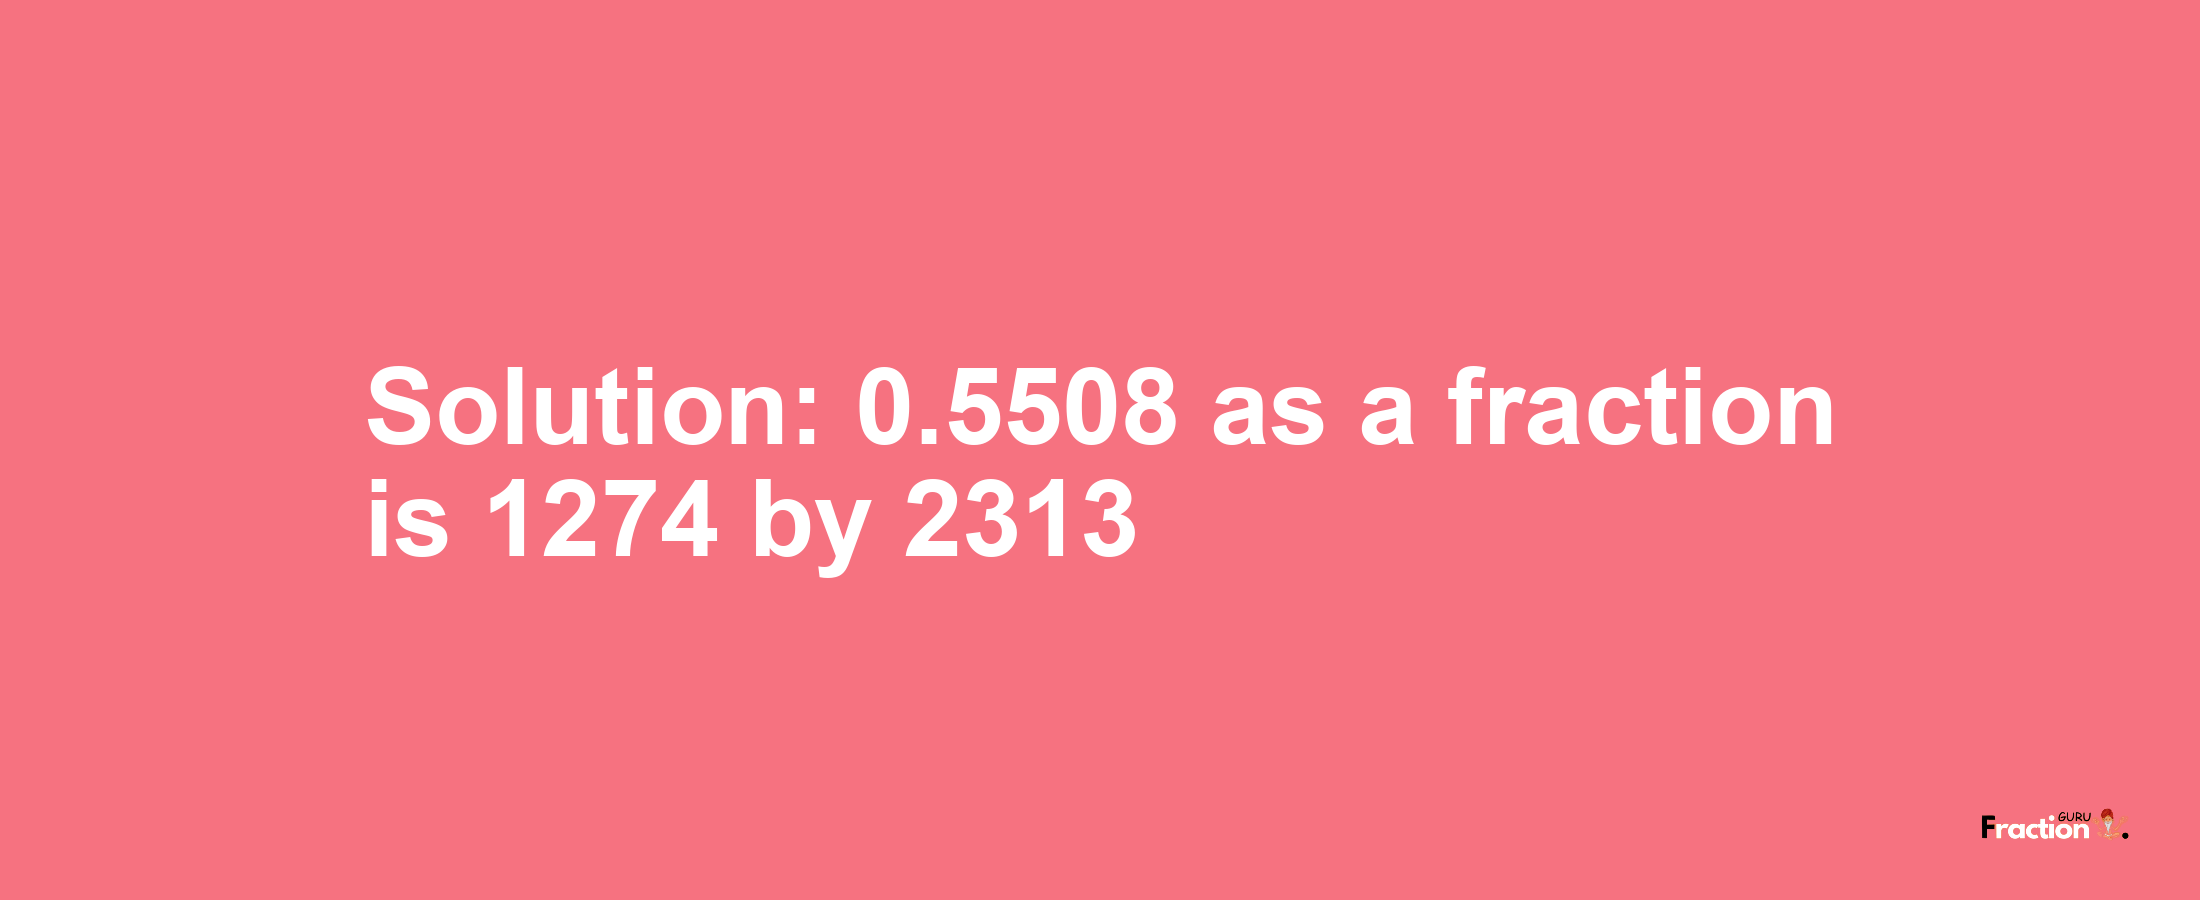 Solution:0.5508 as a fraction is 1274/2313